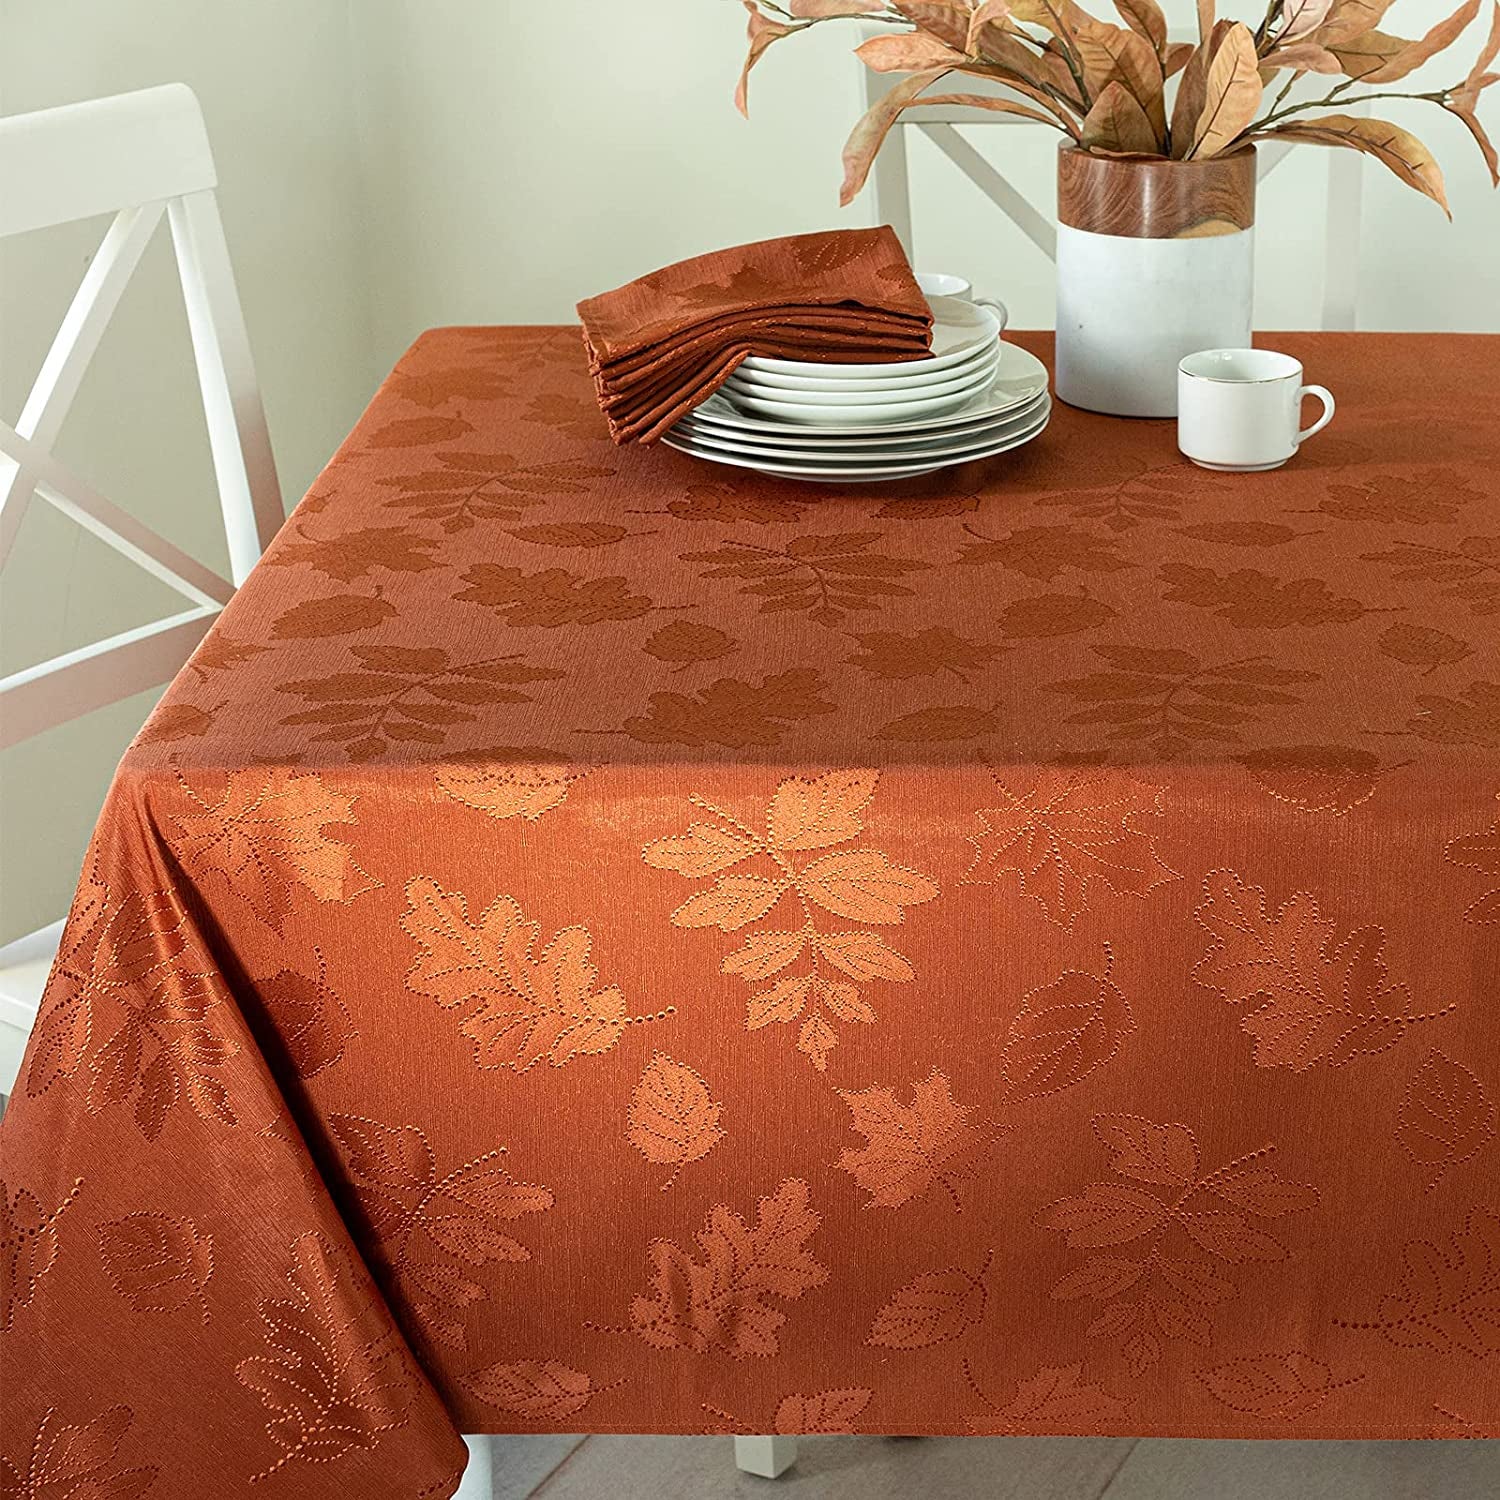 Harvest Legacy Damask Fabric Table Cloth Fall, Harvest, and Thanksgiving Tablecloth (Rust/Burnt Orange, 60" X 104" Rectangular)